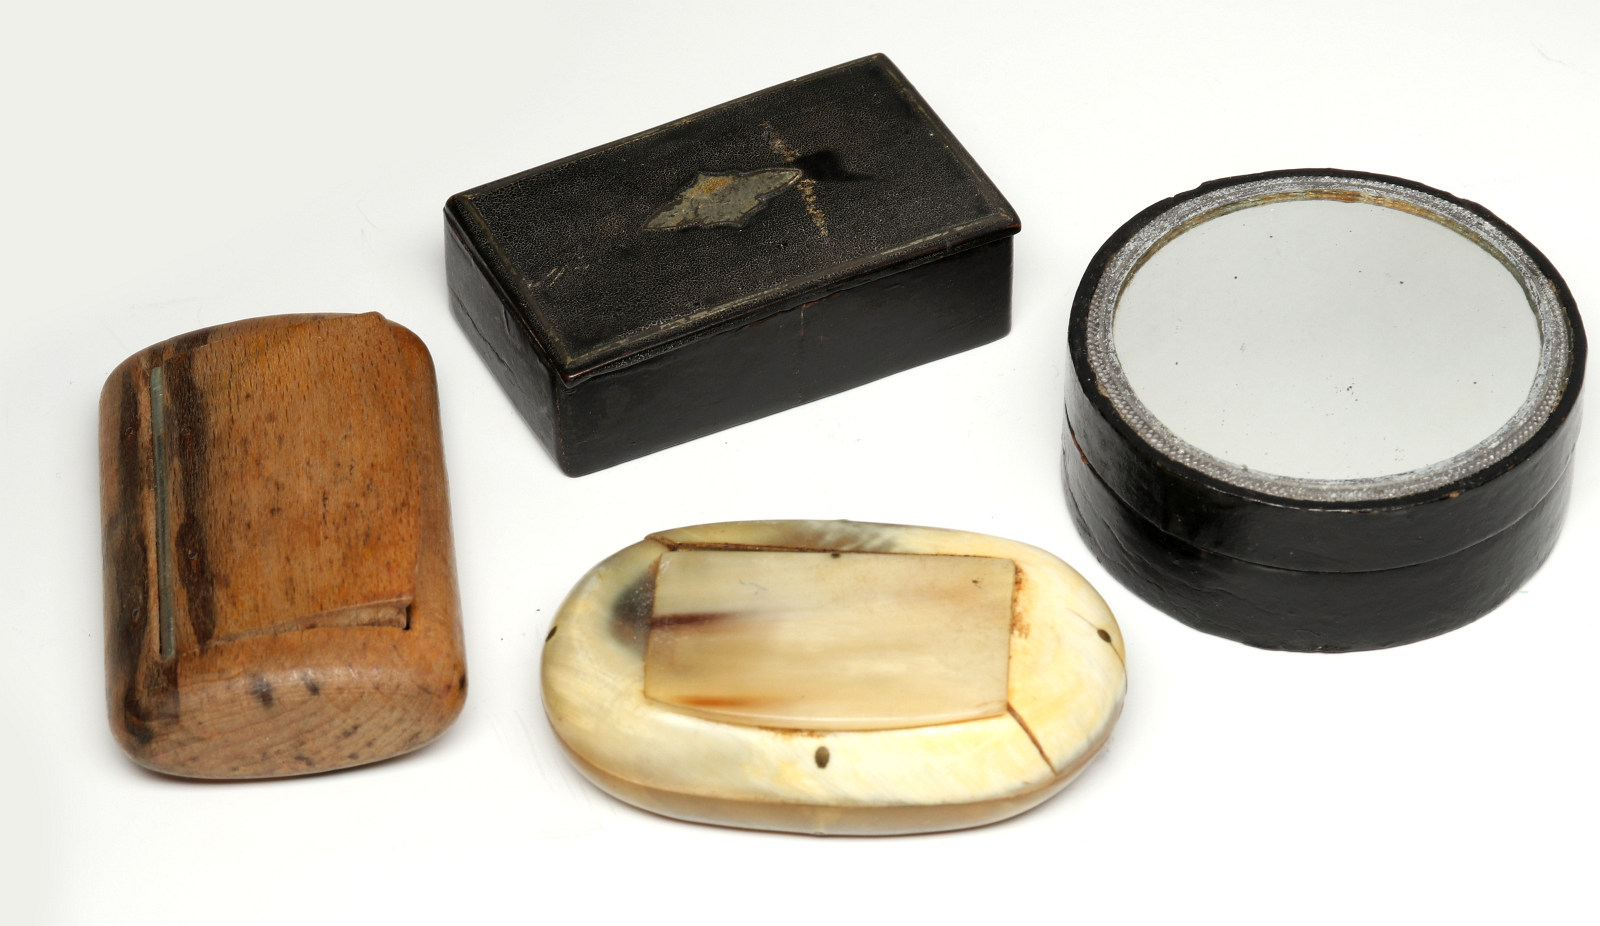 FOUR EARLY 19TH CENTURY SNUFF BOXES